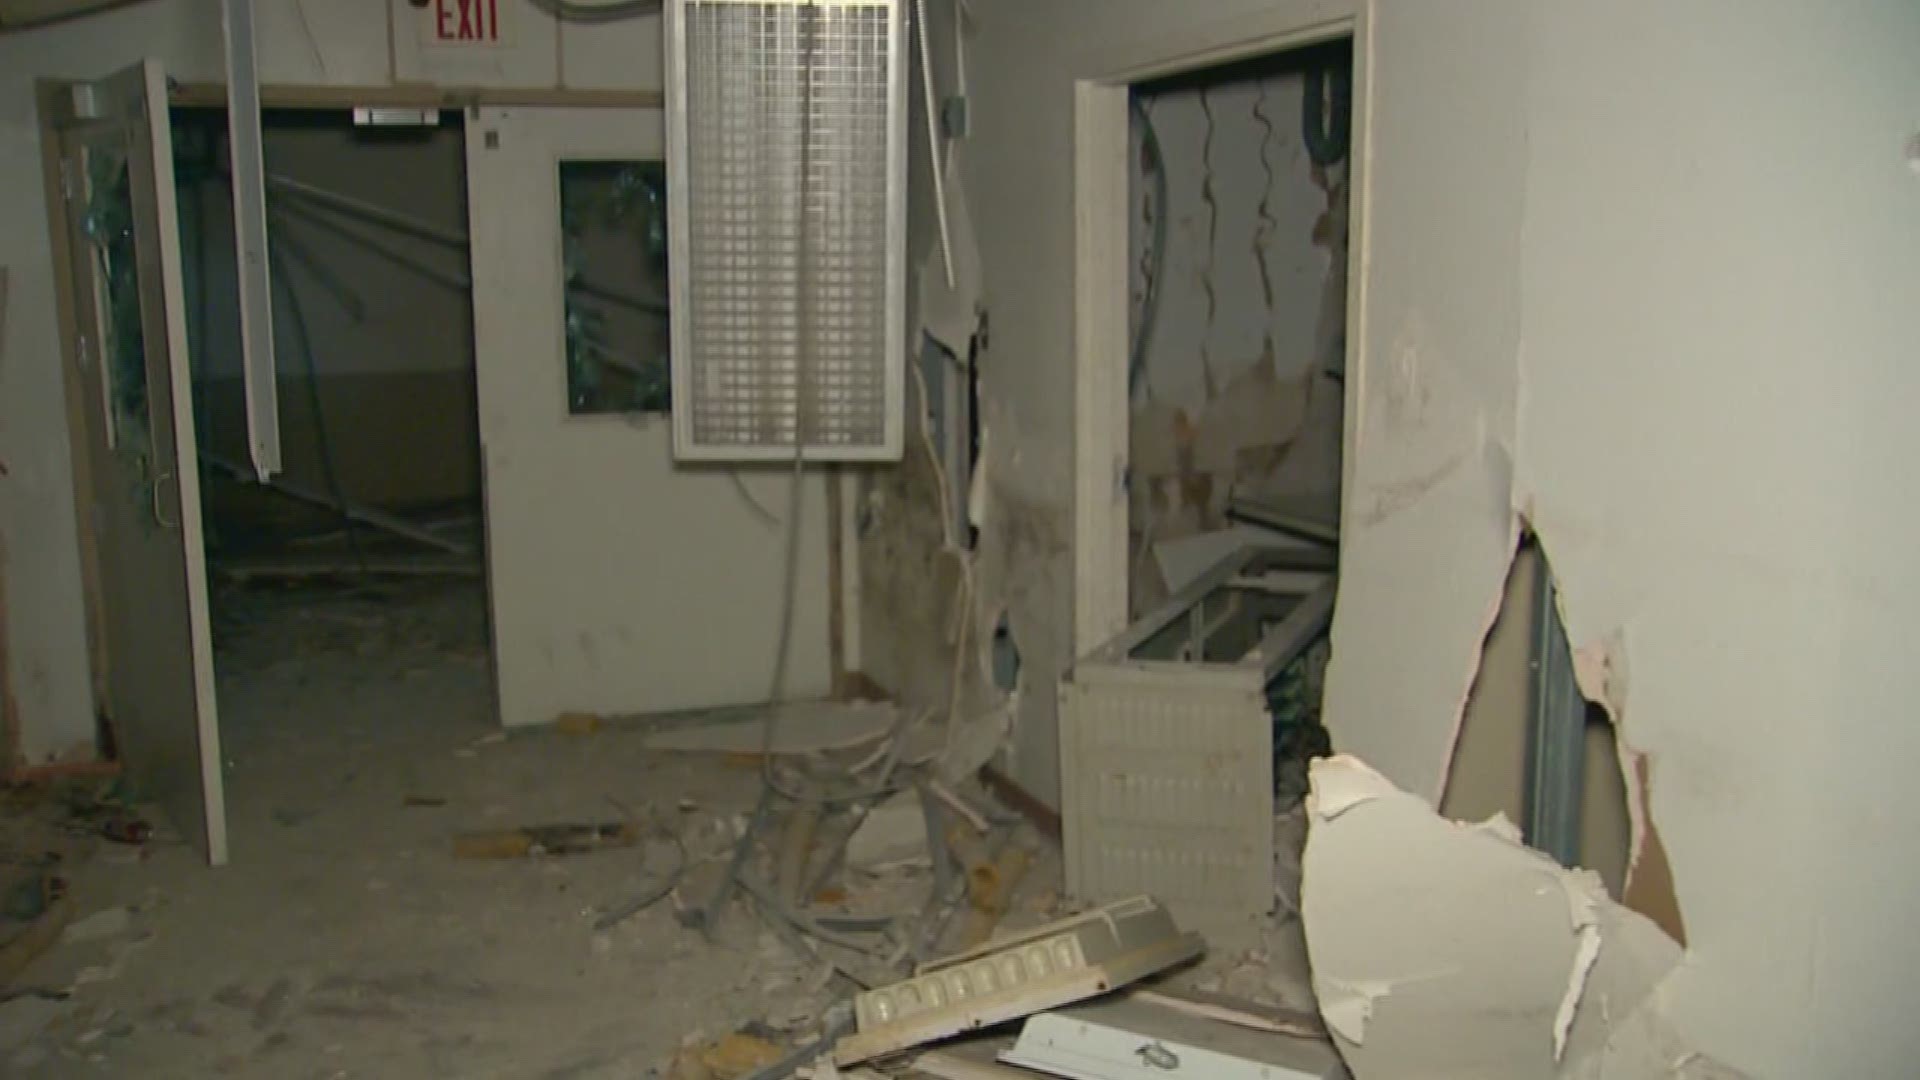 New hope for abandoned hospital in Dallas